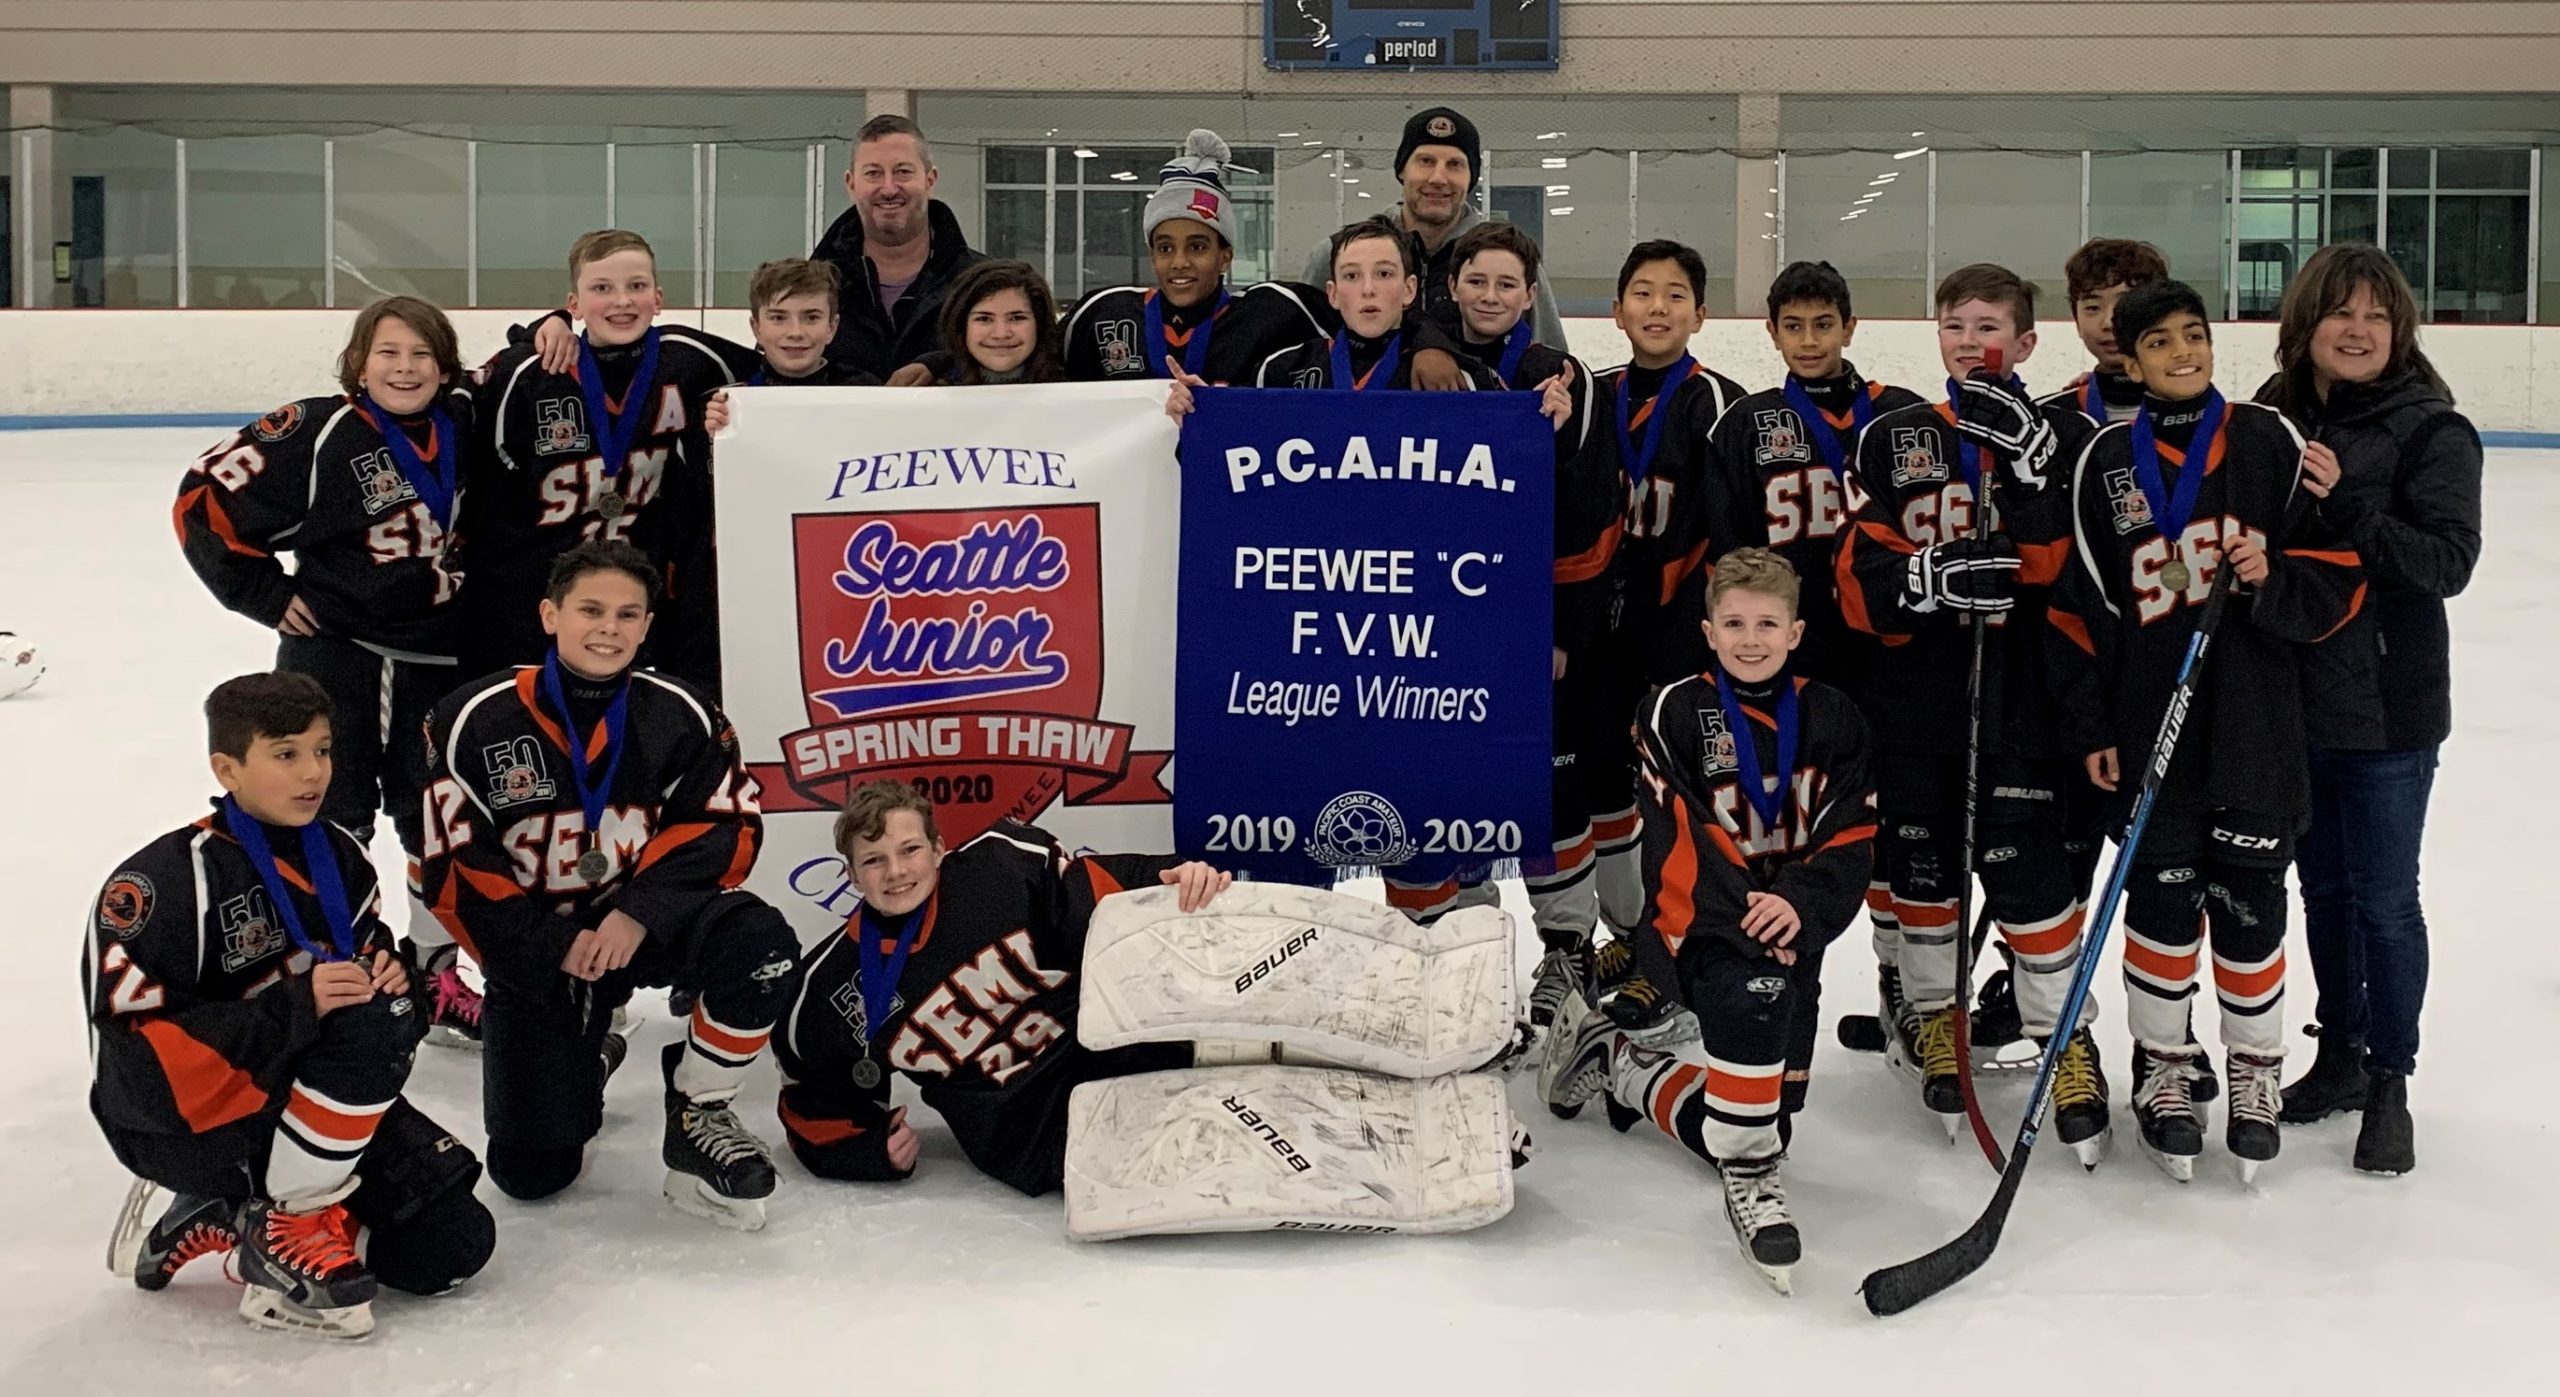 February 17, 2020 ~ PeeWee C2 won gold at the Seattle Spring Thaw tournament. Awesome work team!